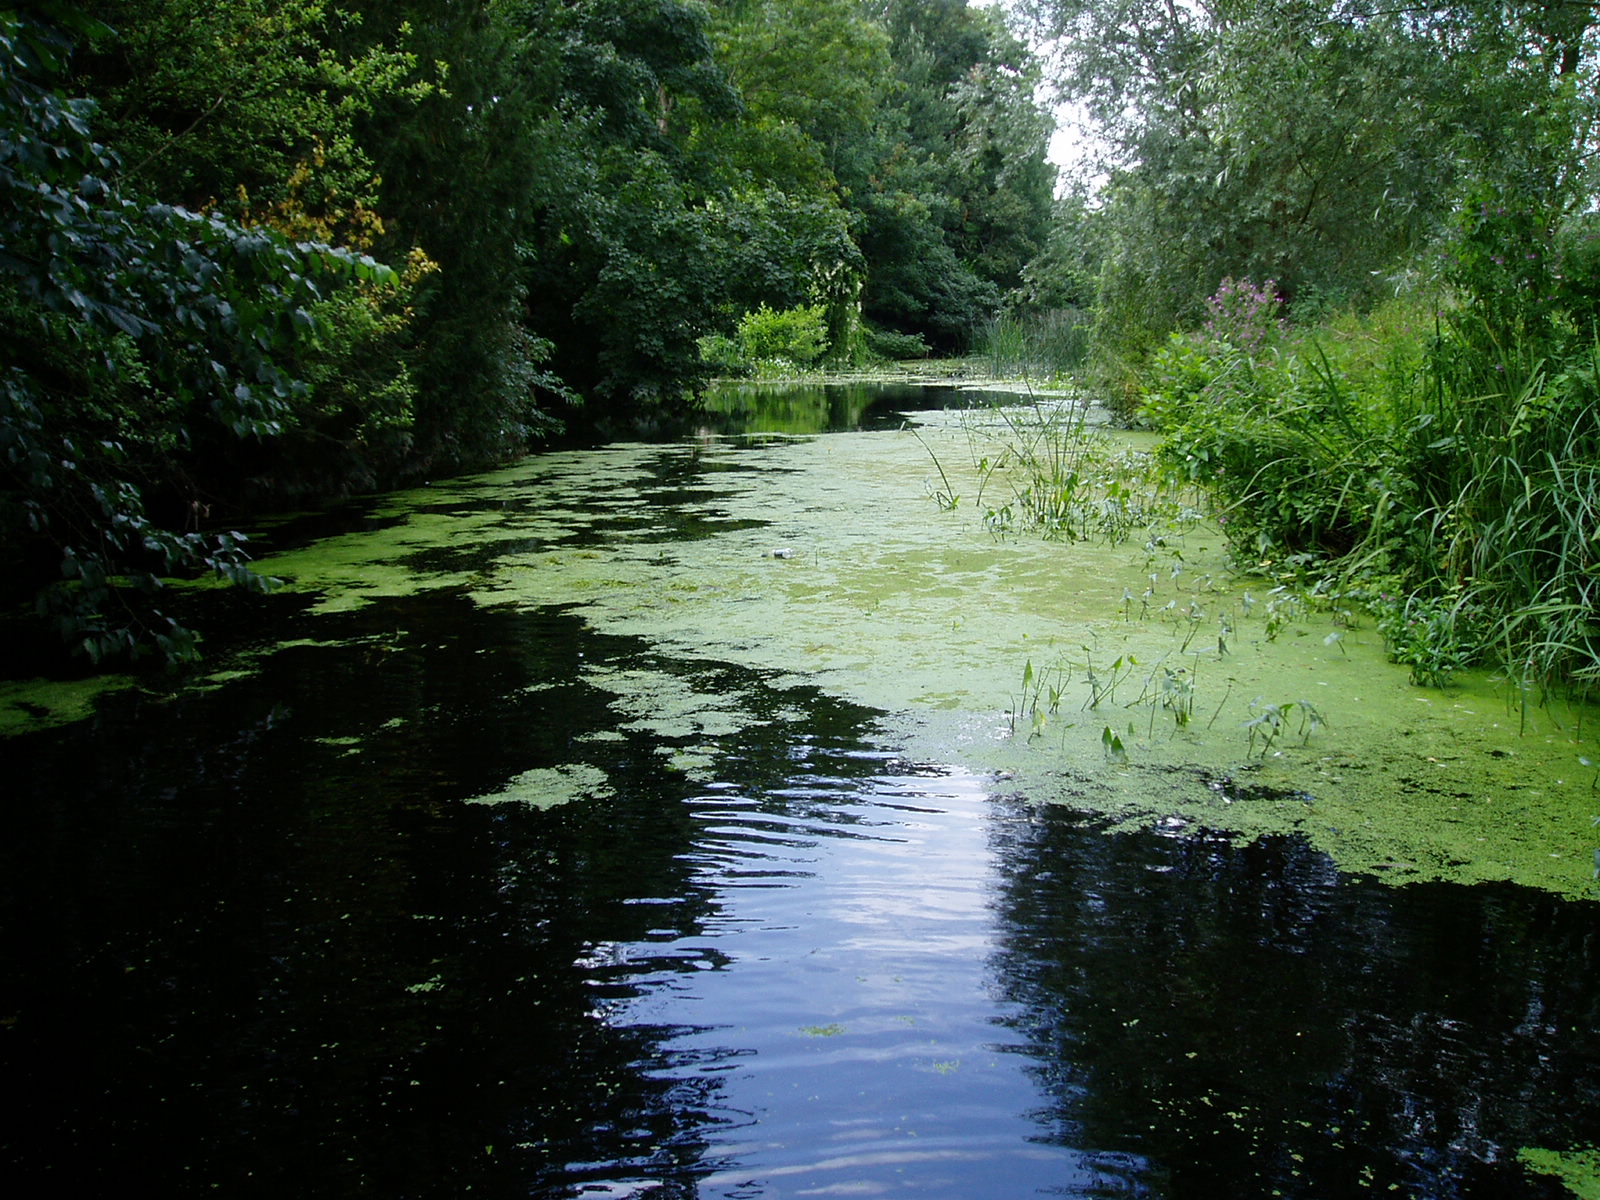 A photo of a river in Gipping Sproughton, East Suffolk catchment